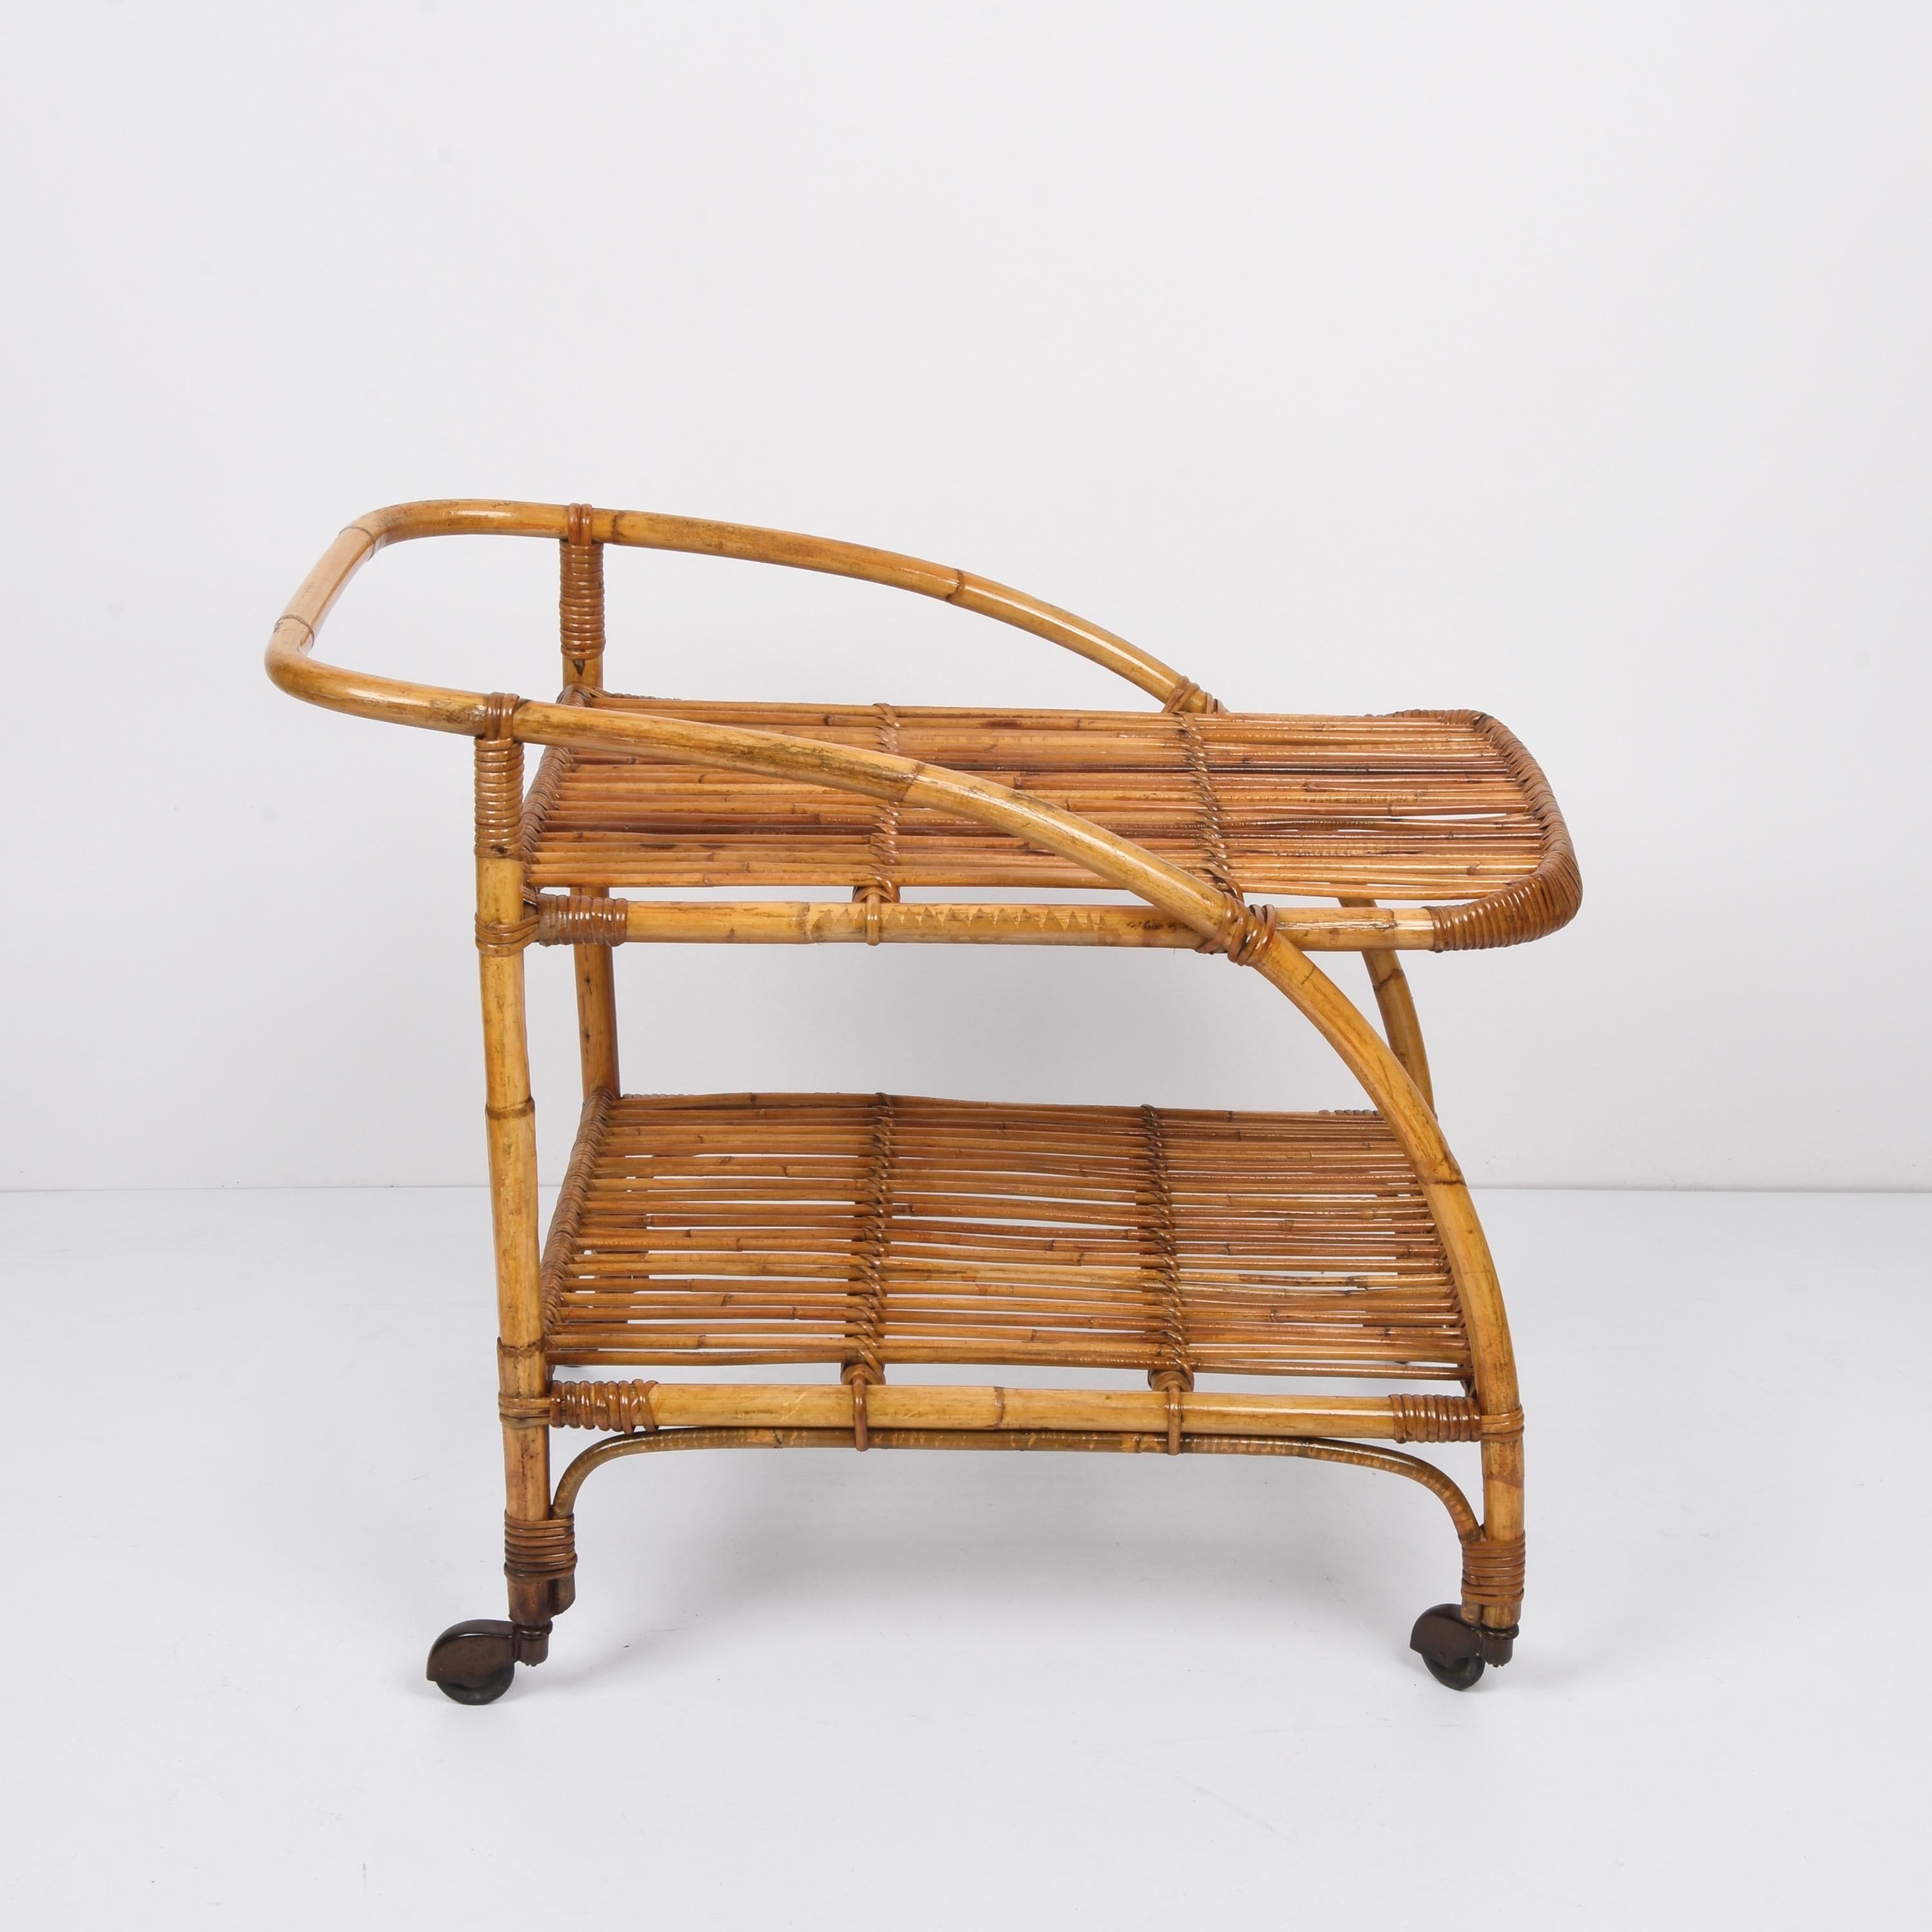 Mid-Century Modern Midcentury Bamboo and Rattan Italian Serving Bar Cart Trolley with Wheels, 1950s